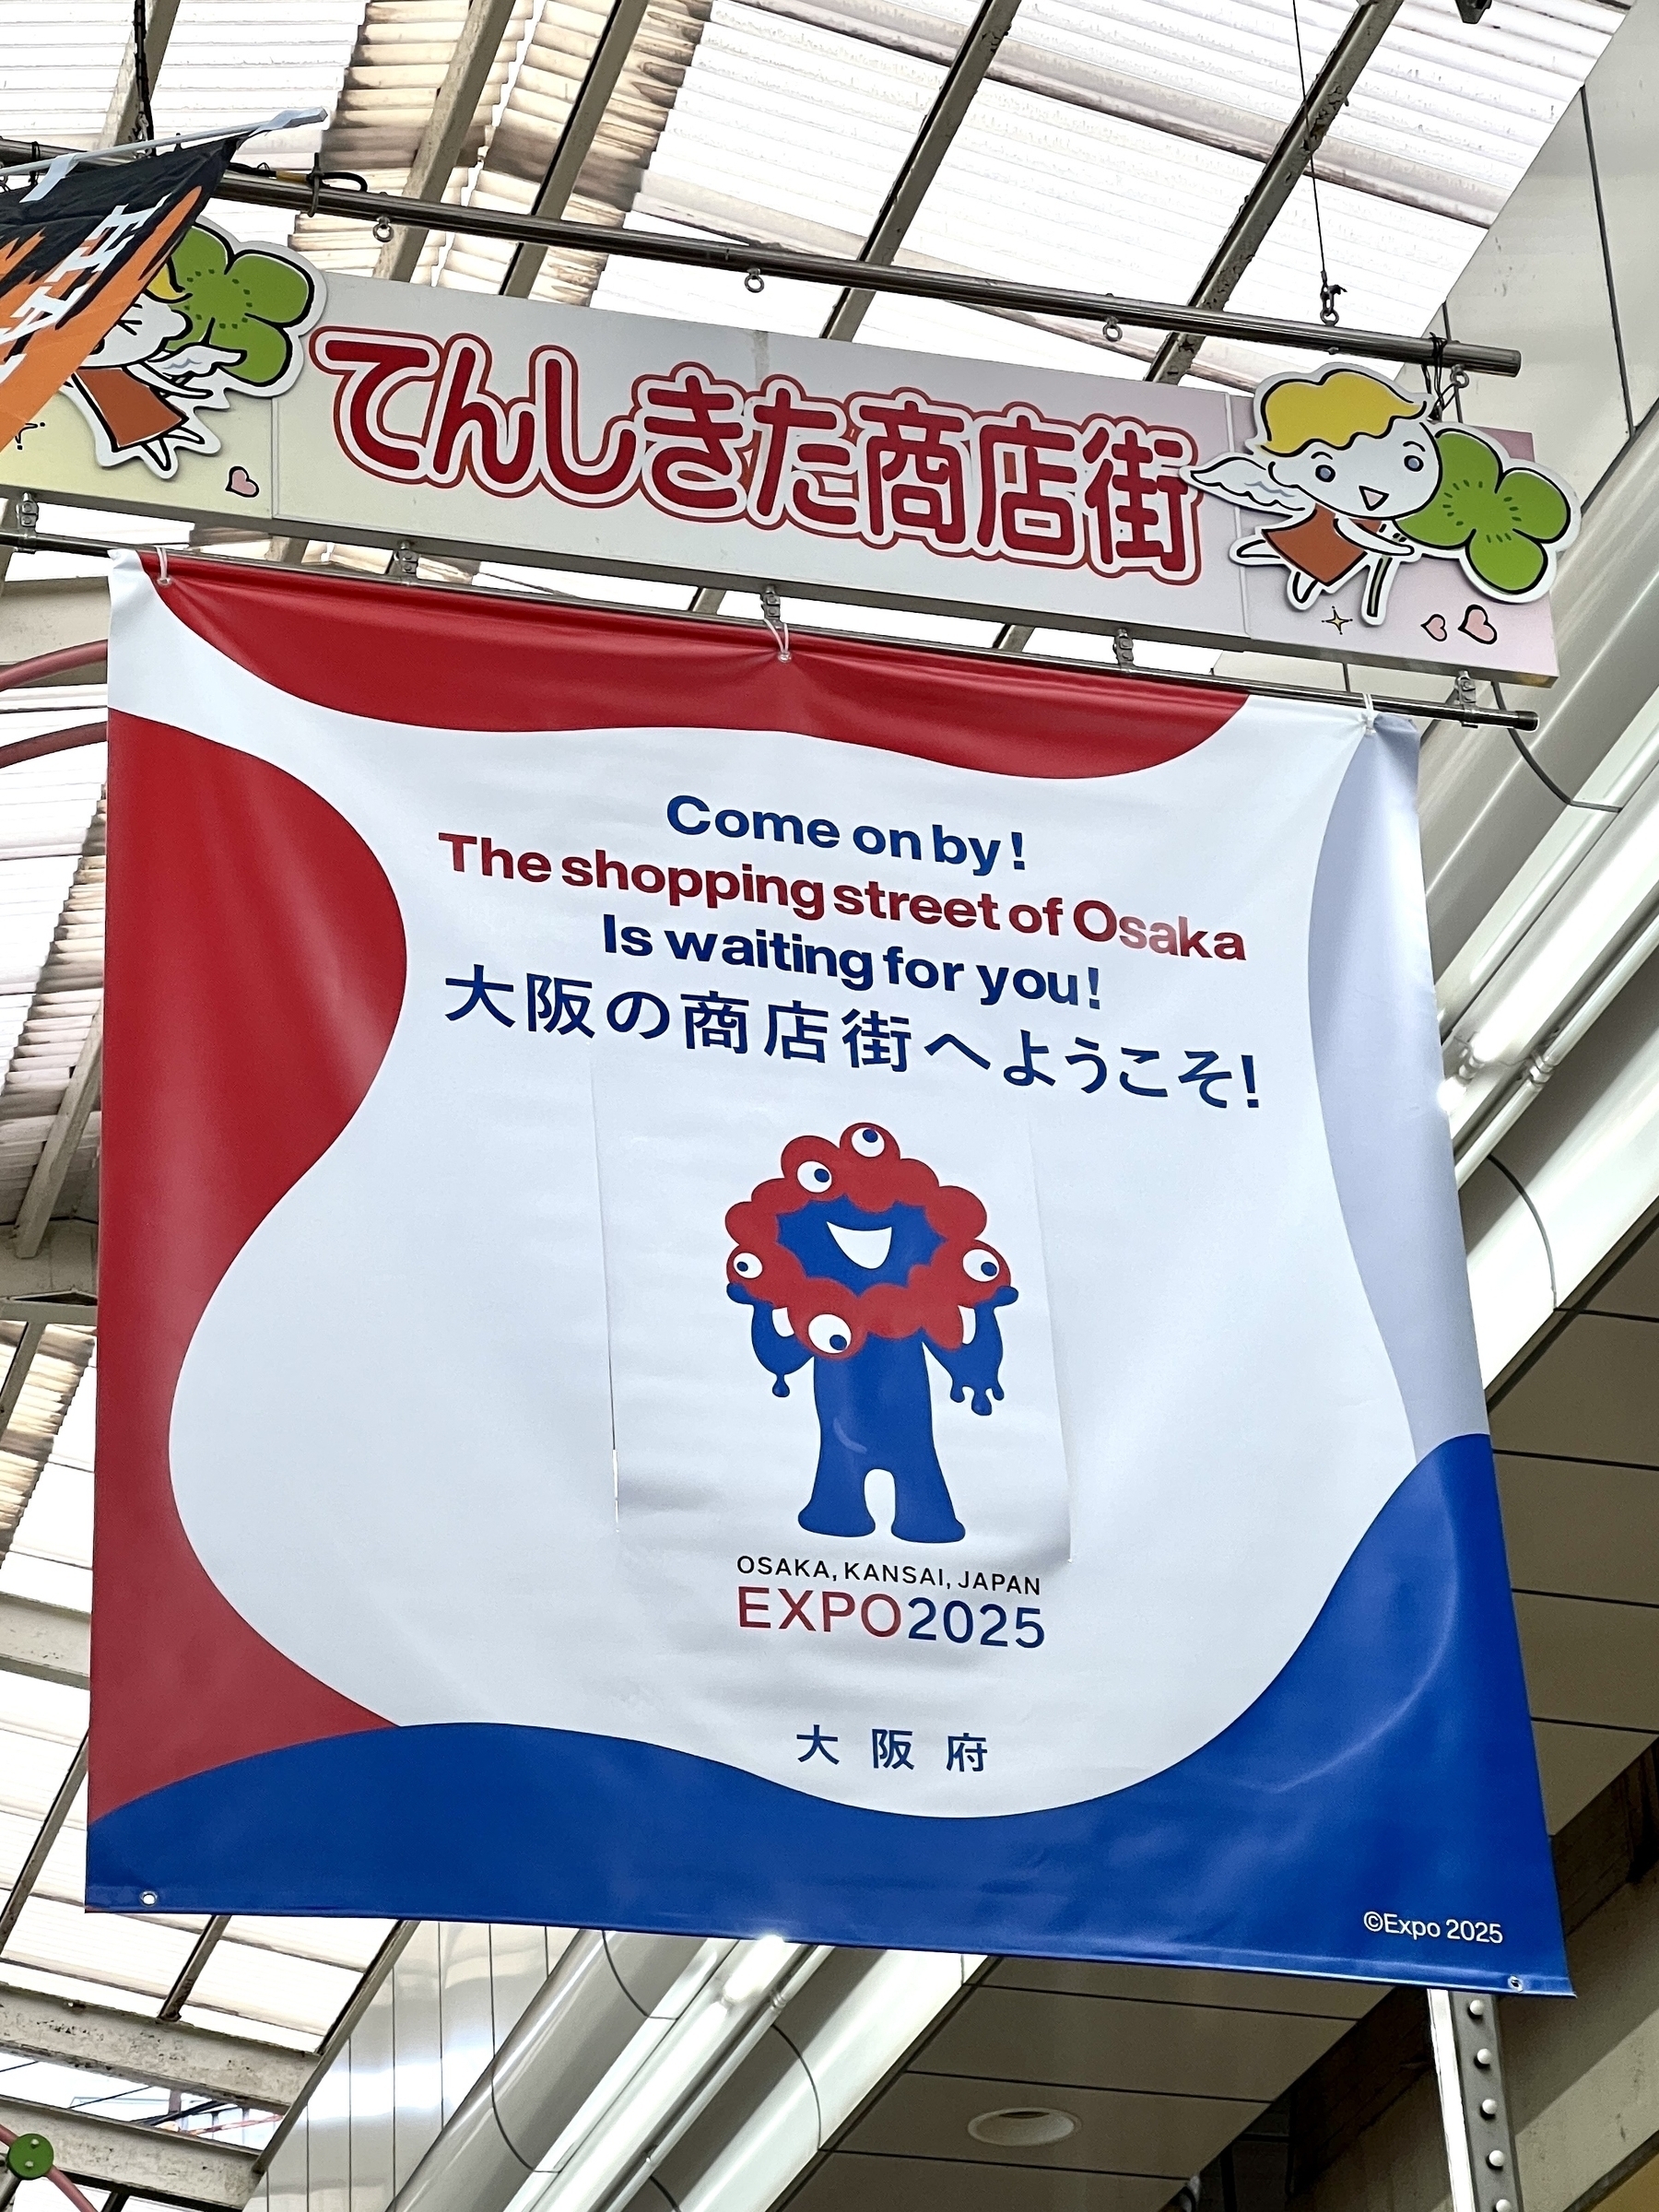 A flag hanging from the shopping arcade ceiling with Myakumyaku-kun saying: “Come on by!&10;The shopping street of Osaka&10;Is waiting for you”